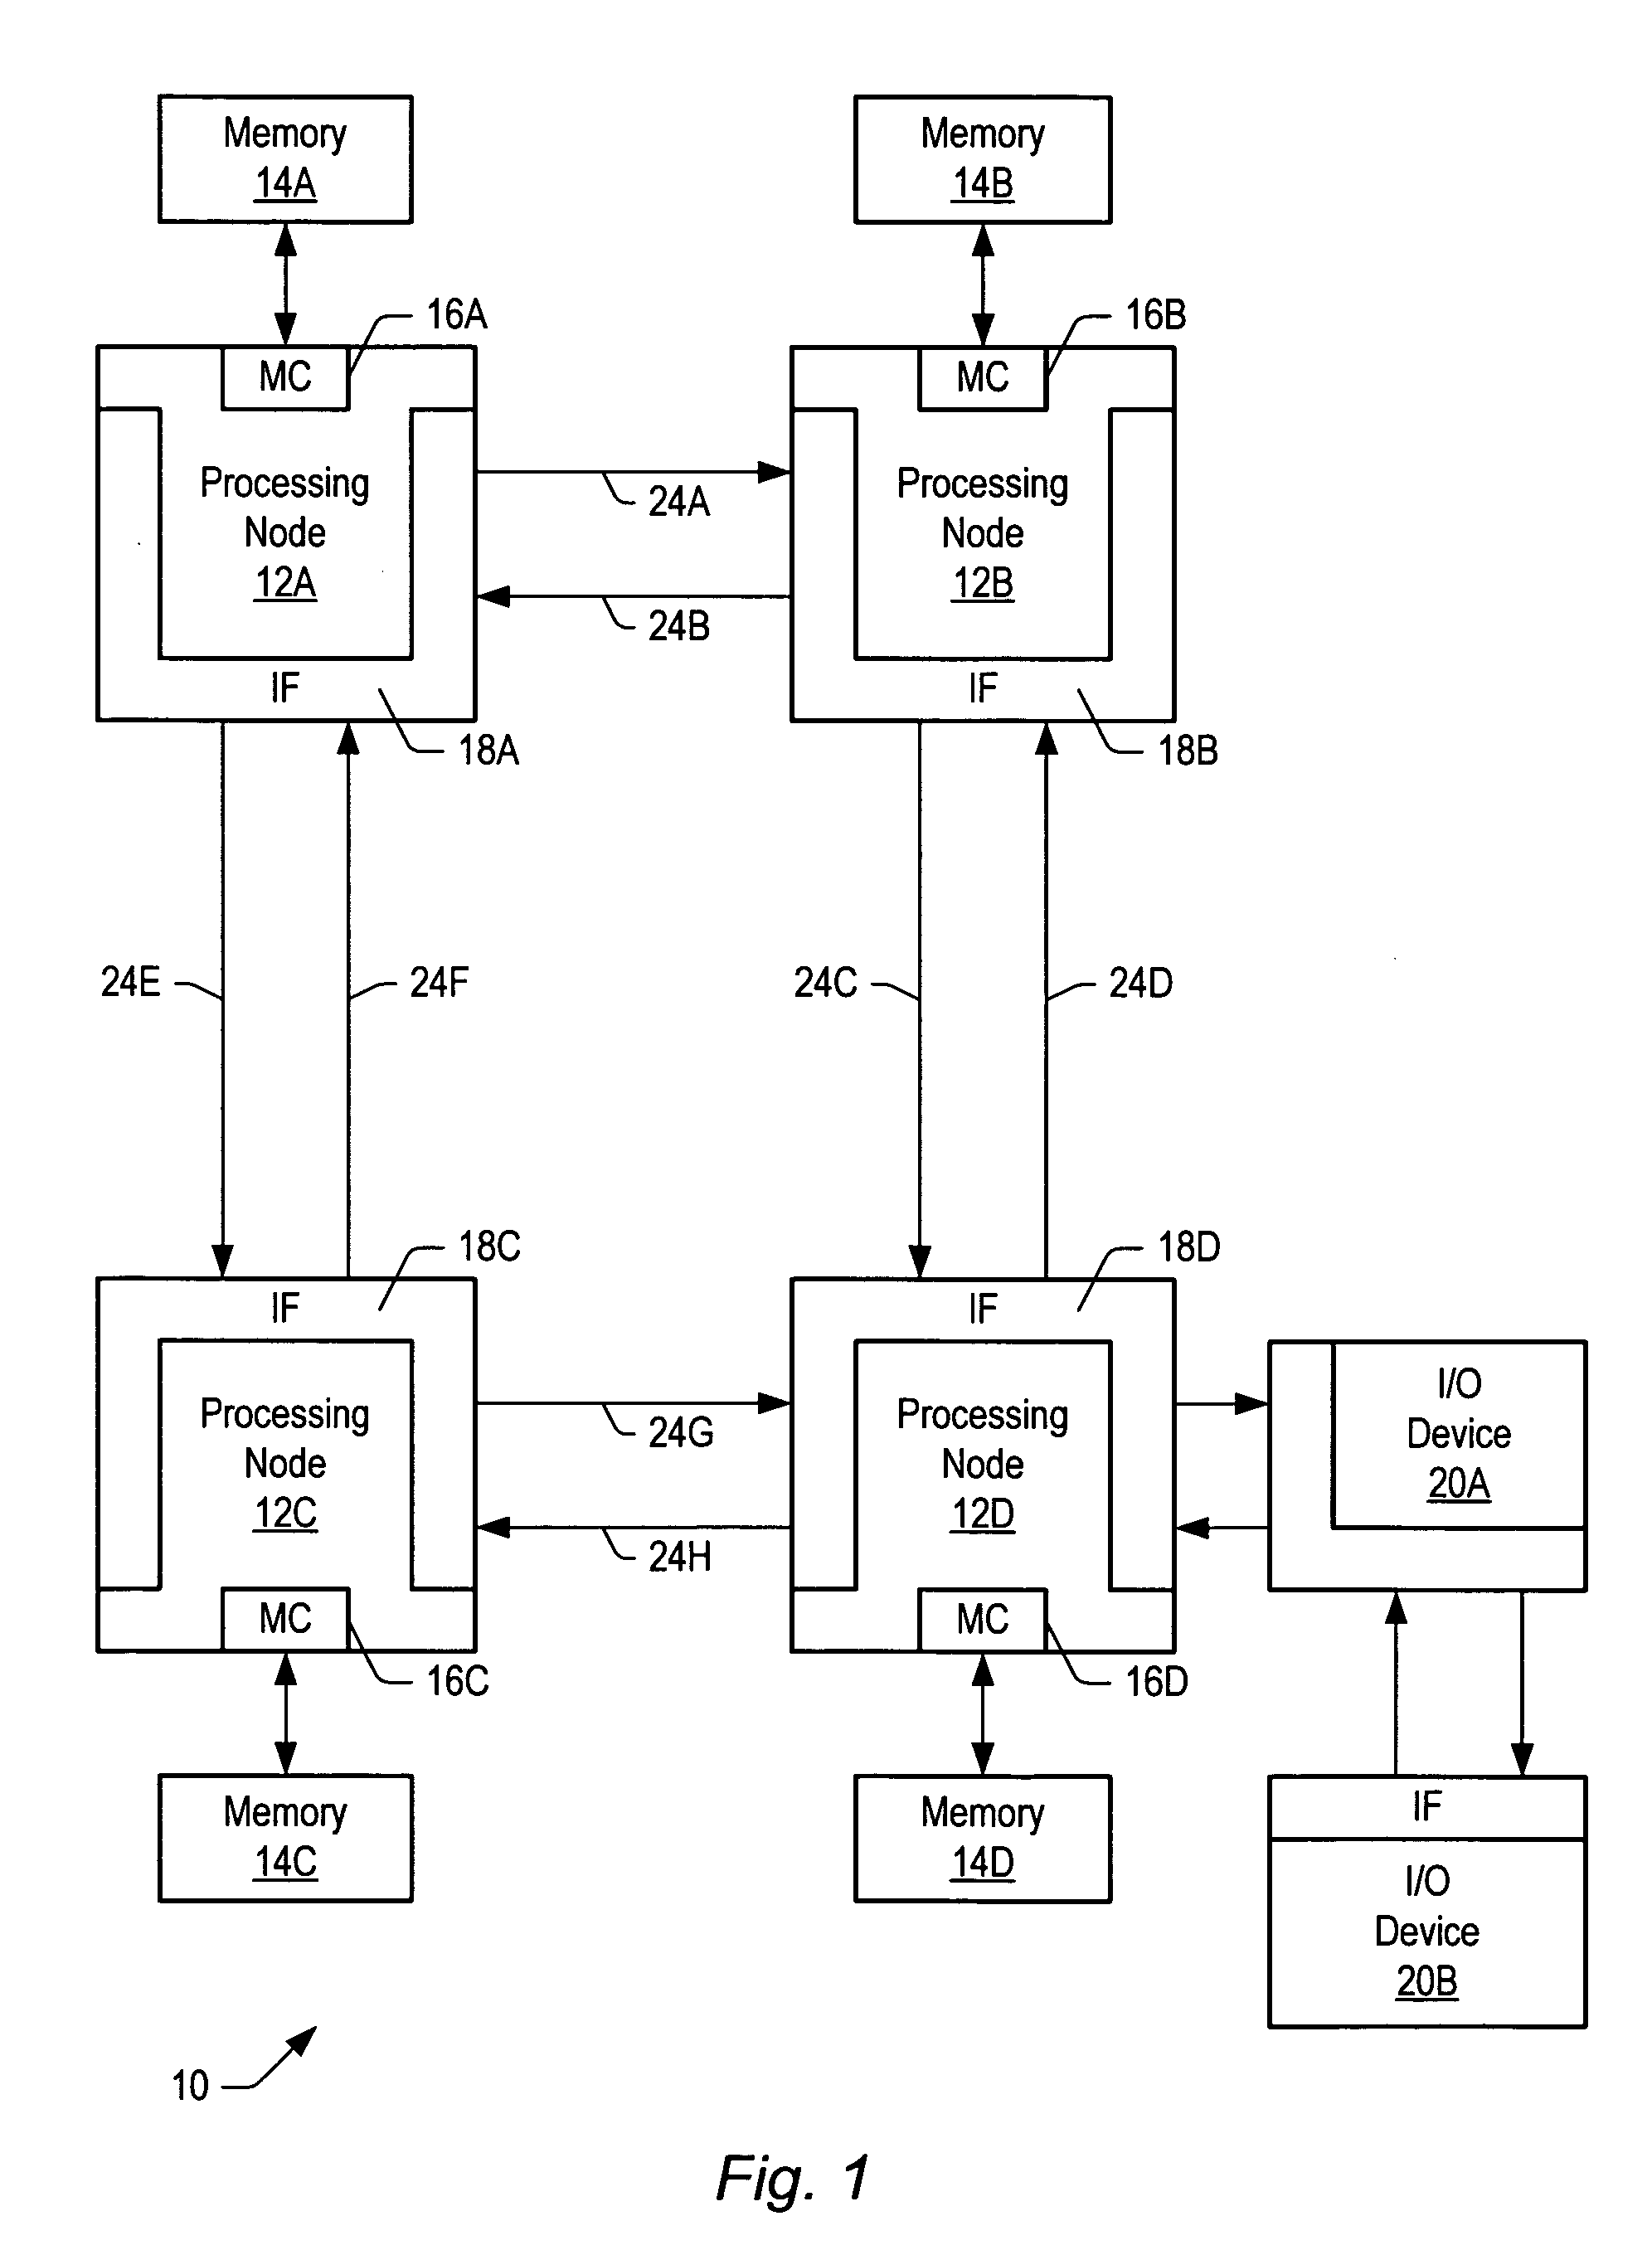 Method and apparatus for detecting and tracking private pages in a shared memory multiprocessor